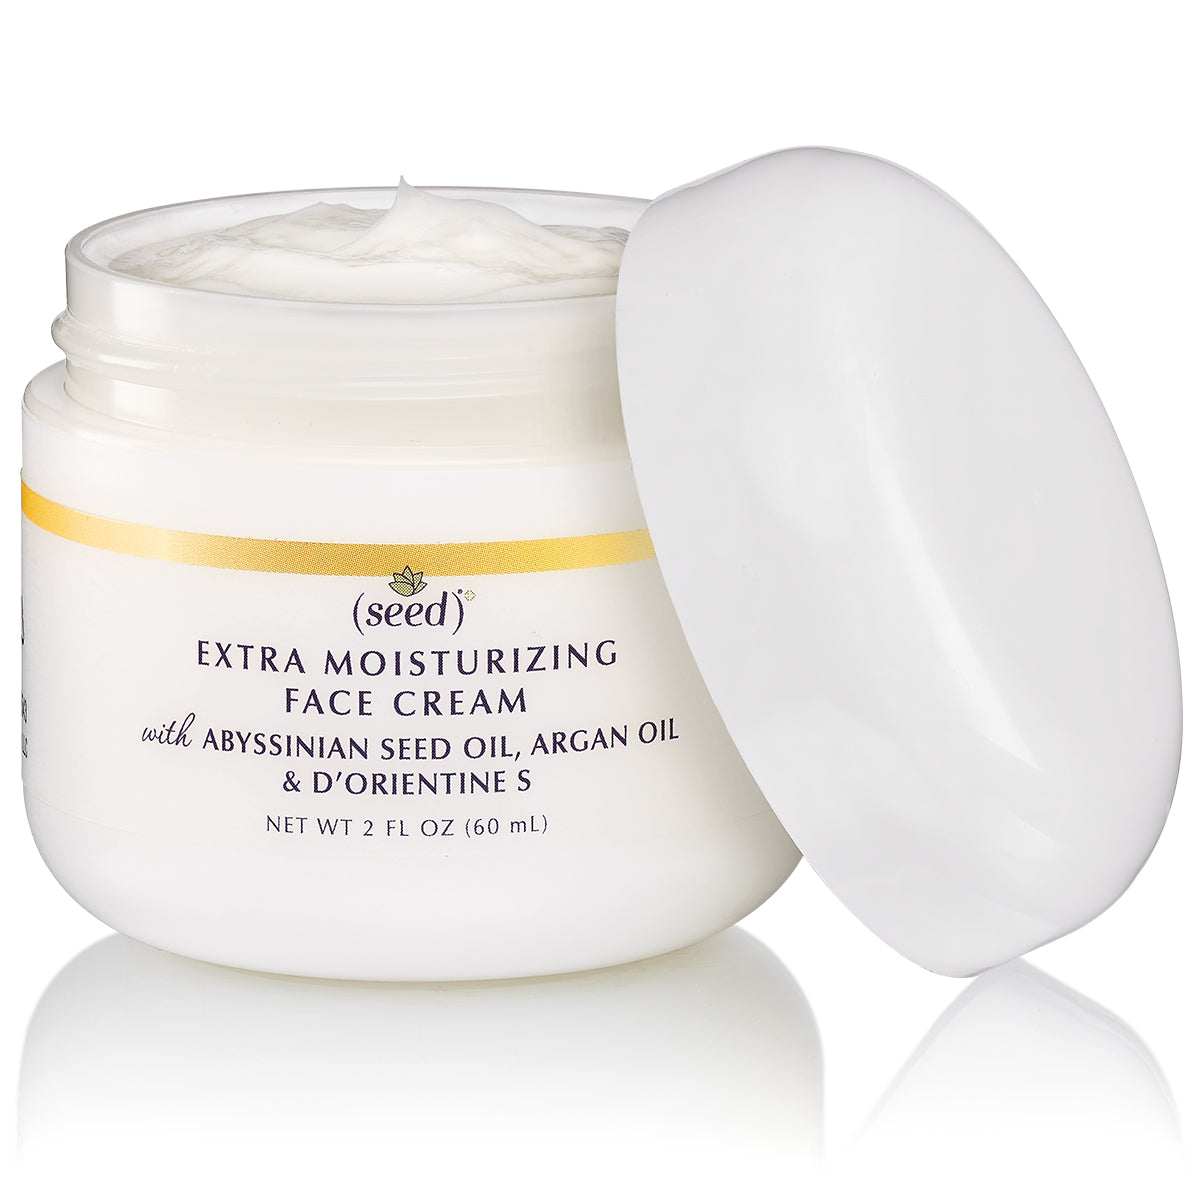 Seed Advanced Botanicals Extra Moisturizing Face Cream with Abyssinian, Argan Oils and D'Orientine S